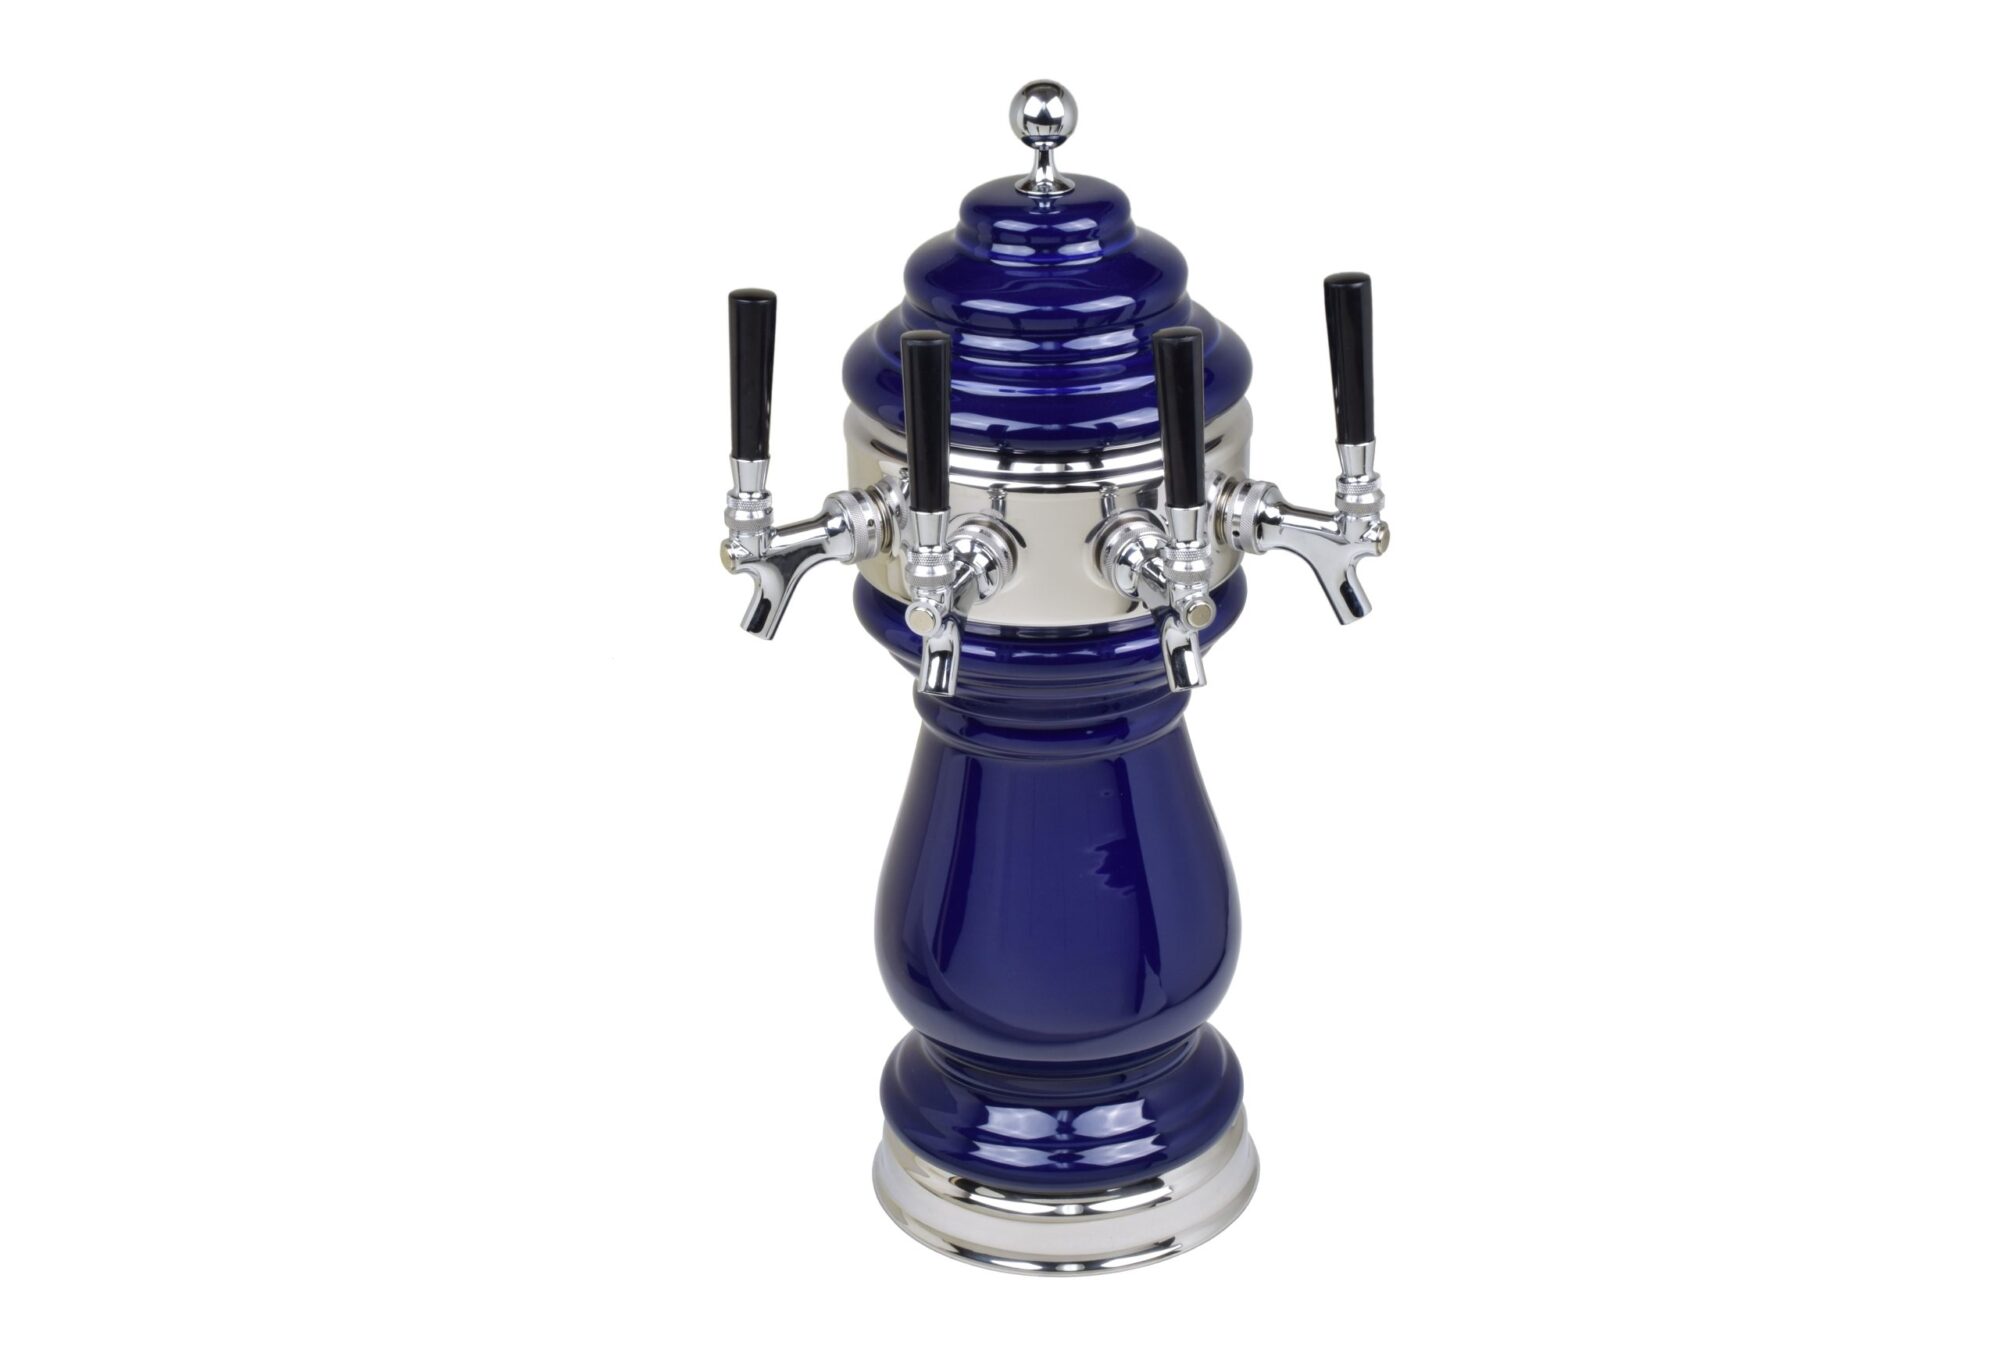 882C-4BL Four Faucet Ceramic Tower with Chrome Plated Hardware - Available in 5 Colors - Shown in Cobalt Blue